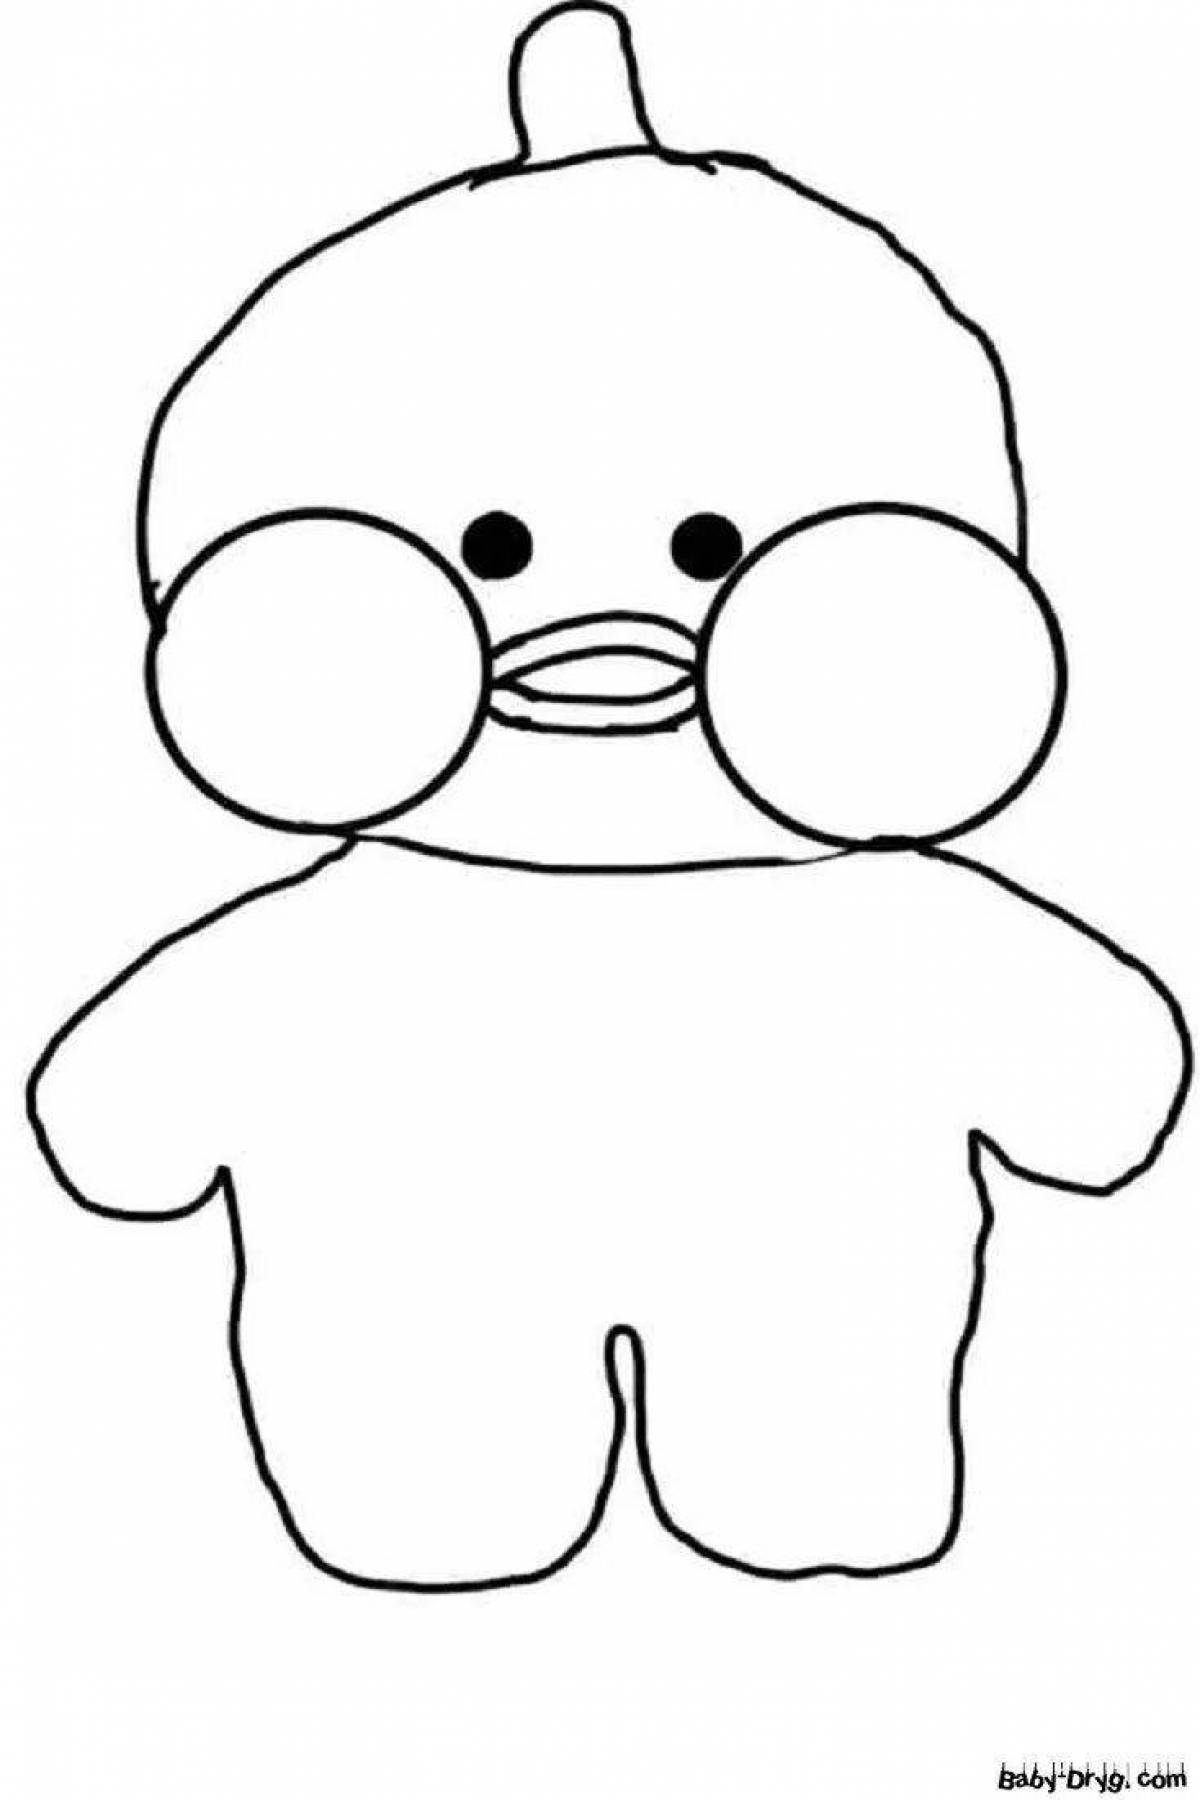 Lanfang duck coloring page